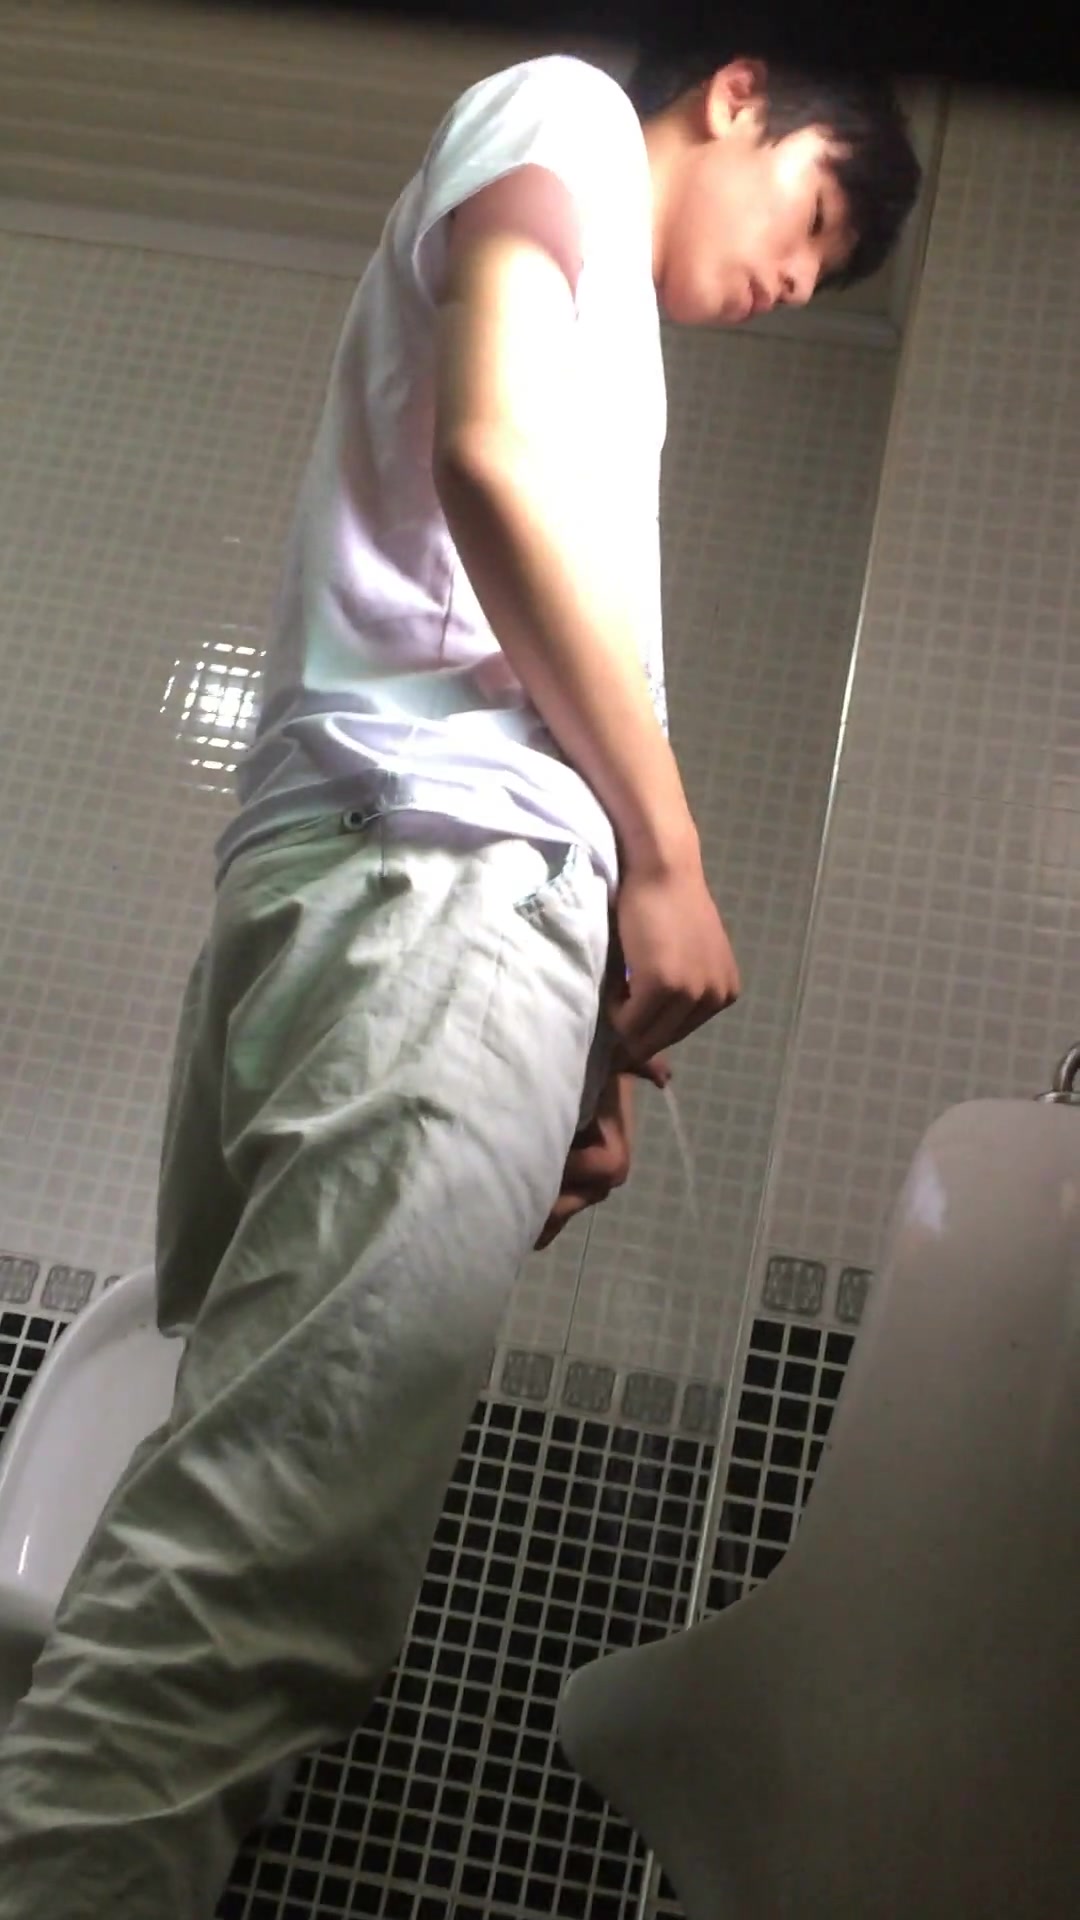 ASIAN BOY PISSING IN THE TOILET pic photo